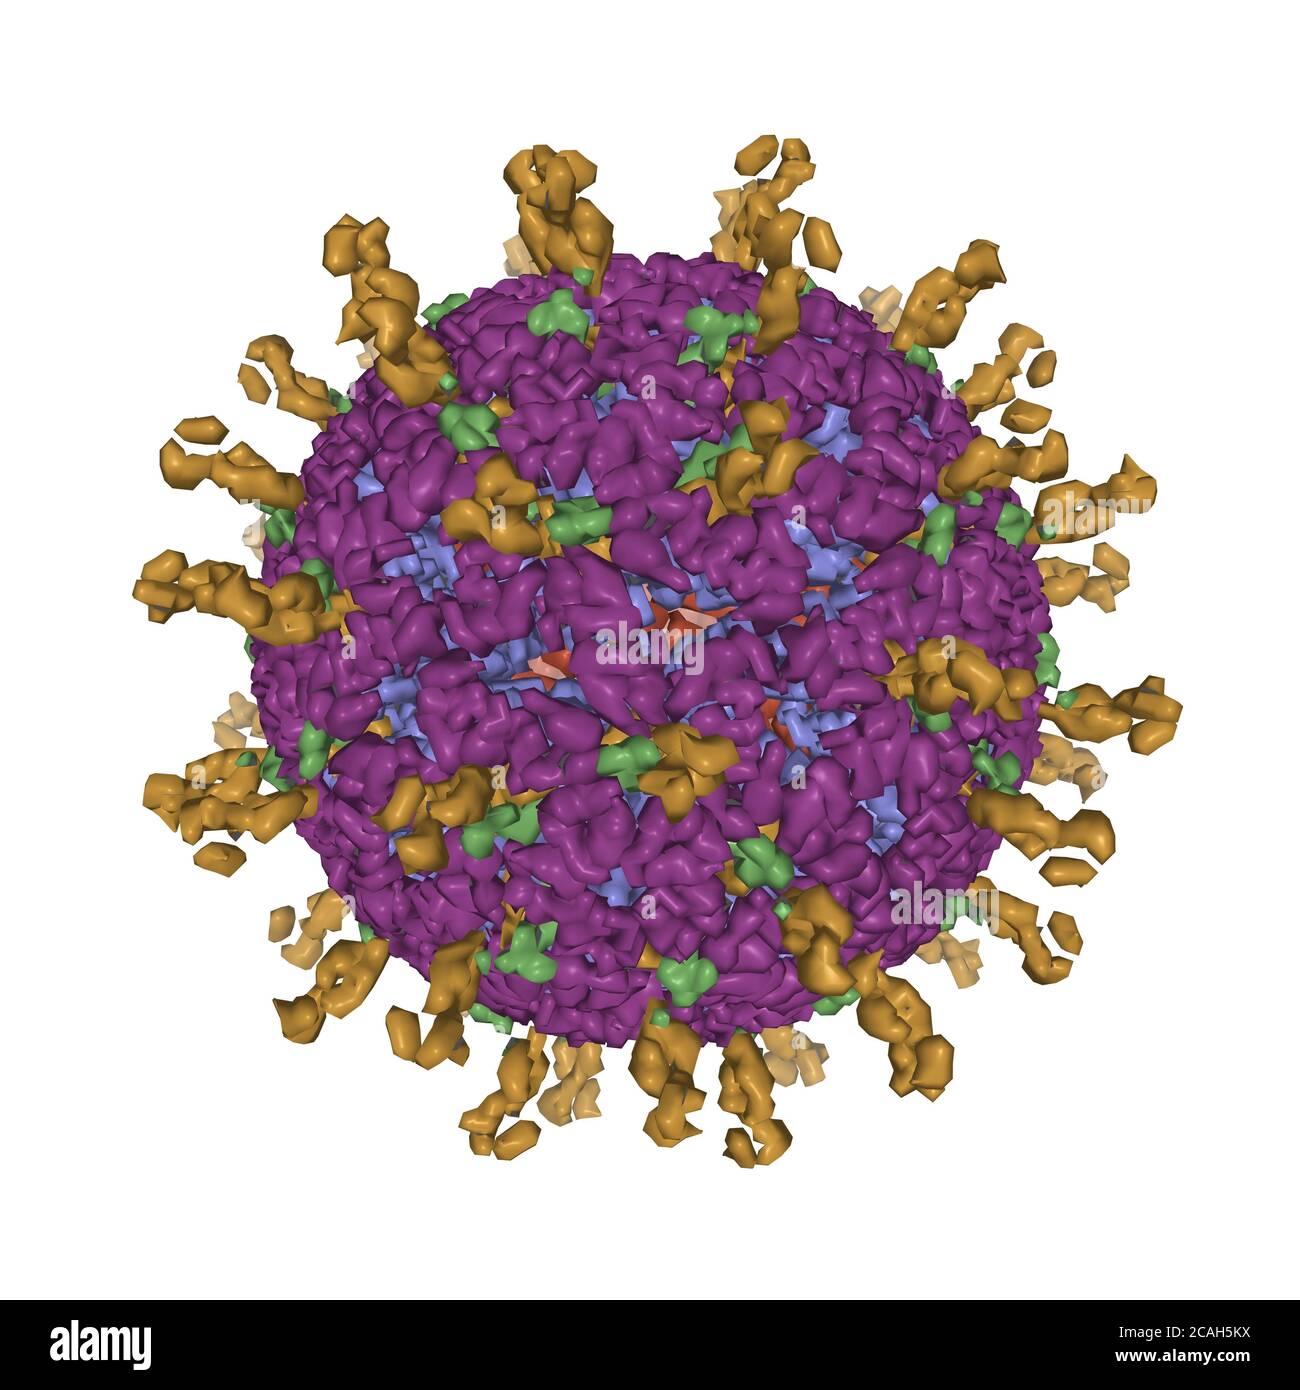 Atomic model of an infectious rotavirus particle, 3D Gaussian surface model, white background Stock Photo